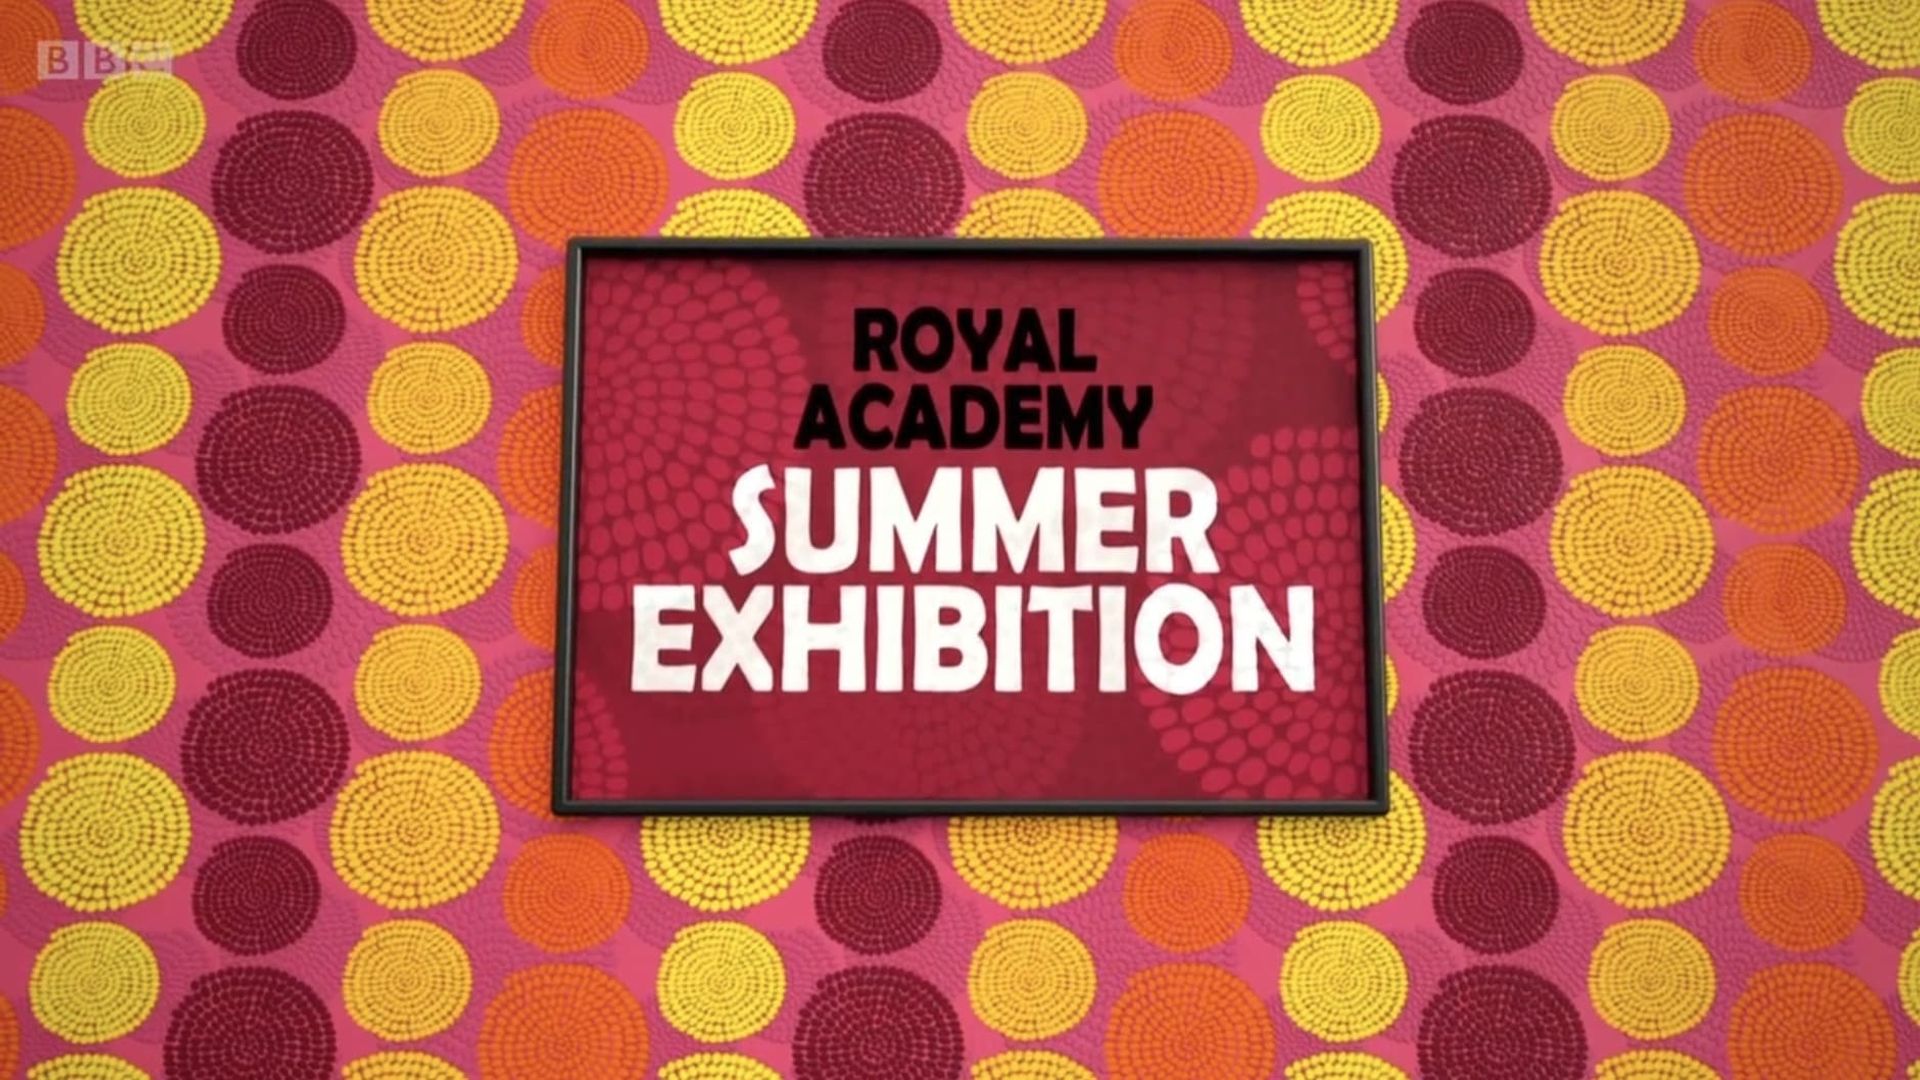 Royal Academy Summer Exhibition background